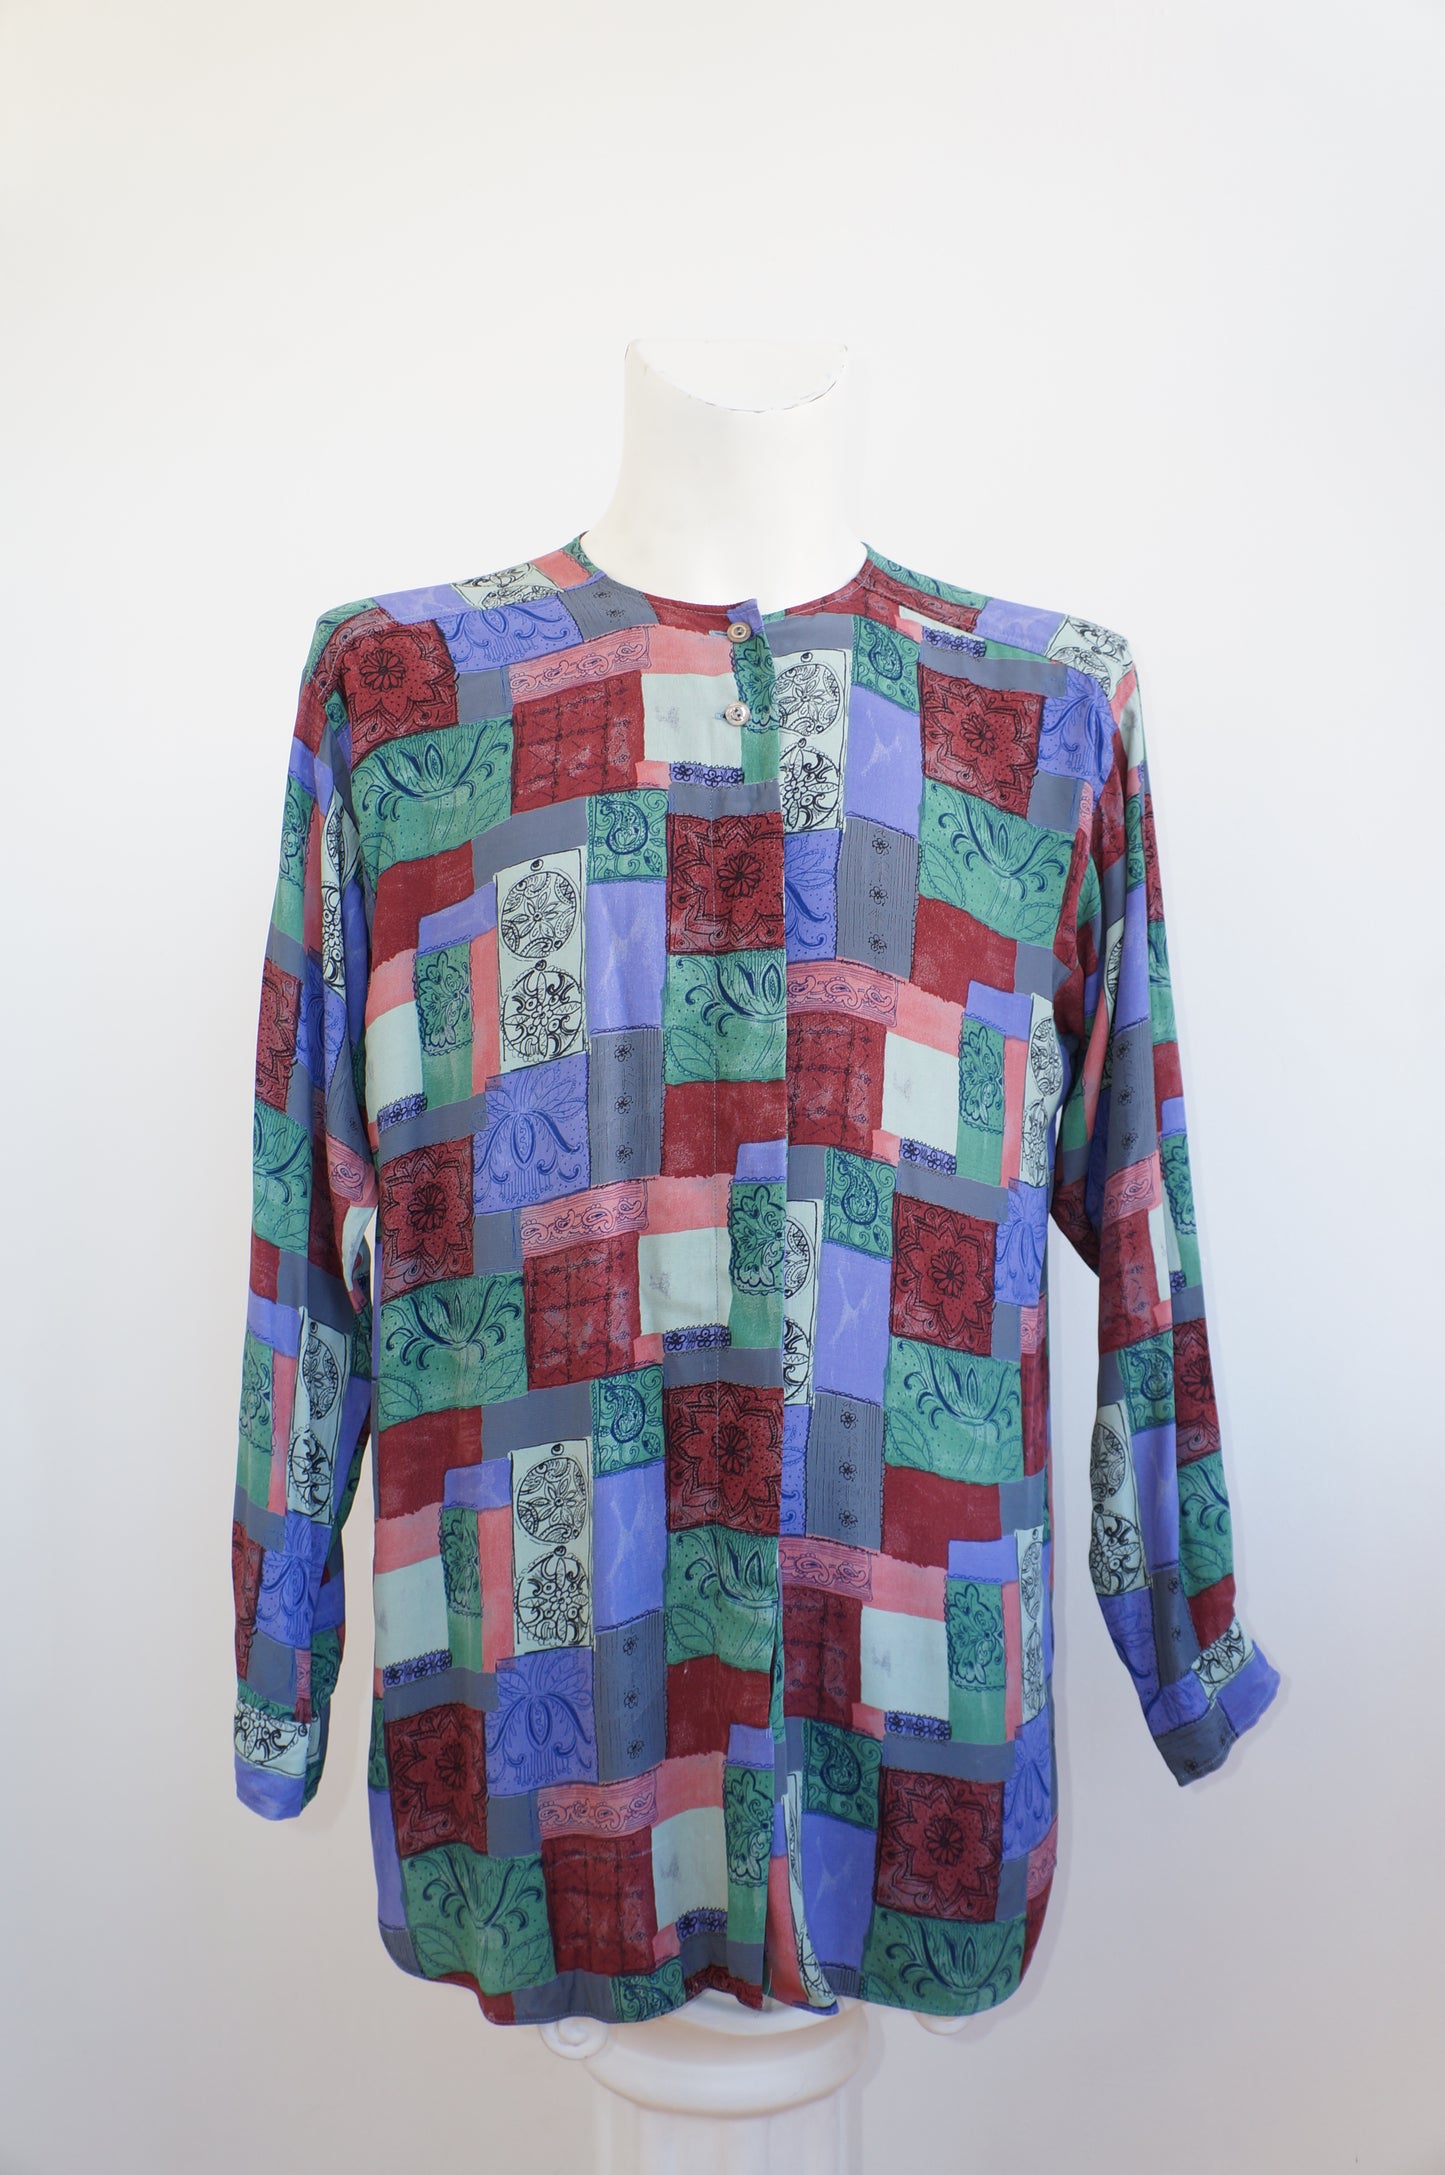 Colorful patchwork shirt